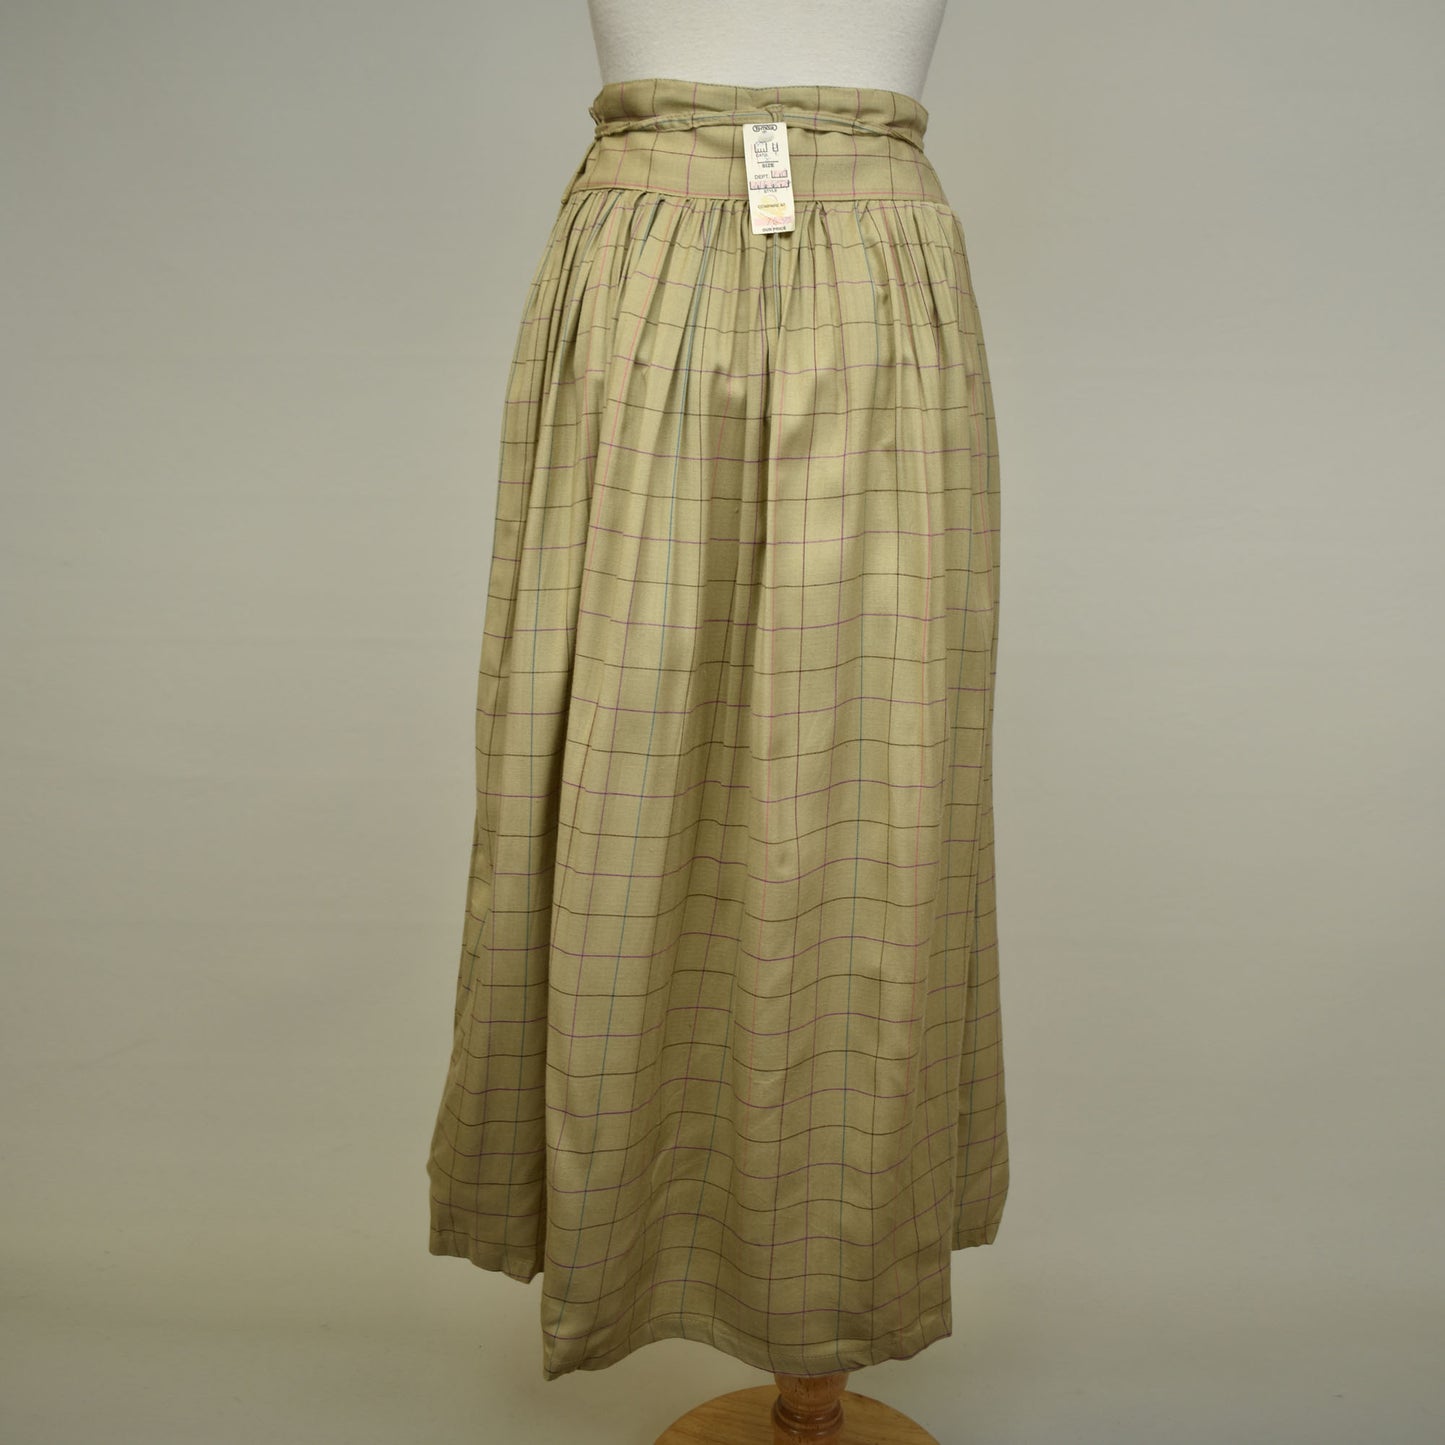 Vintage 70s Plaid Print Rayon J. Crew  Long Skirt - Size 6 - Made in India